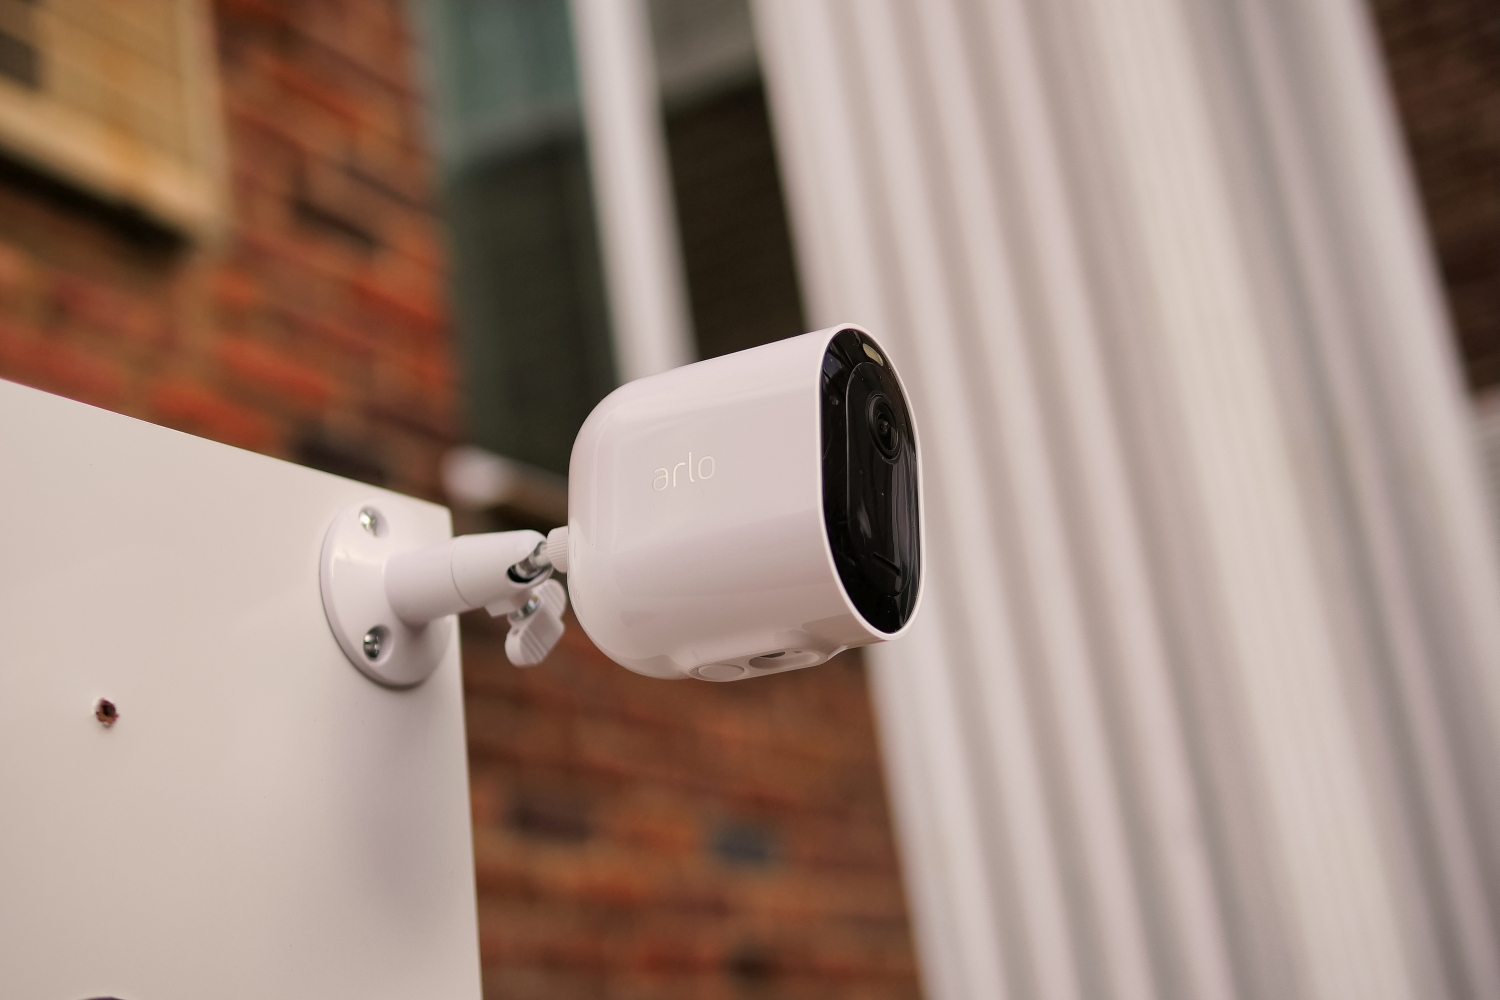 What is The Difference between Arlo Vs Eufy Security Cameras